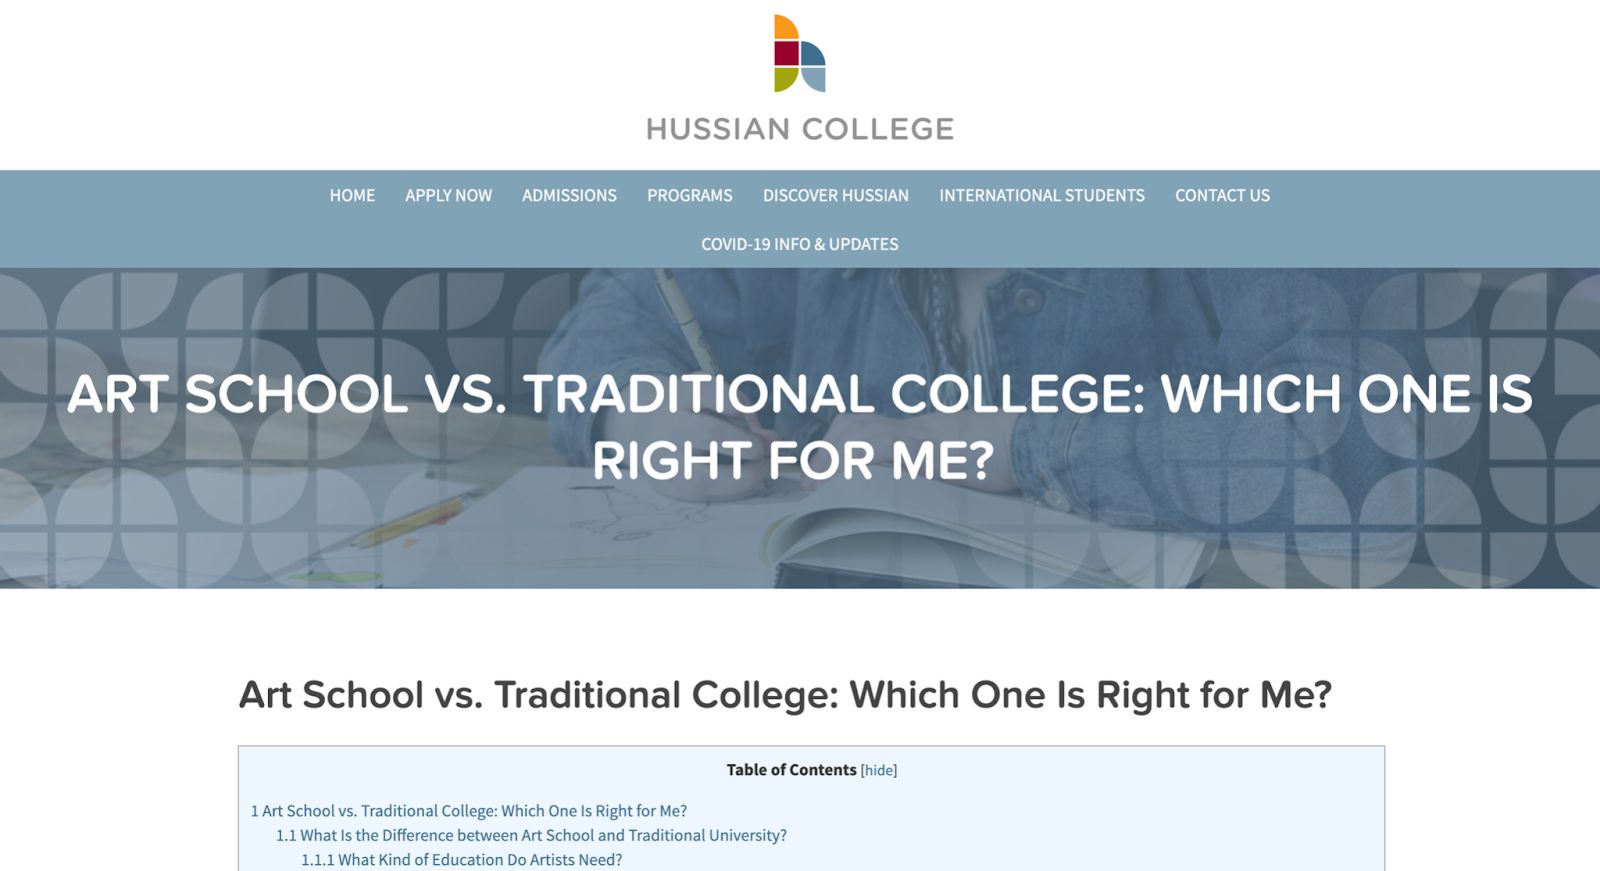 comparison-article-examples-hussian-college